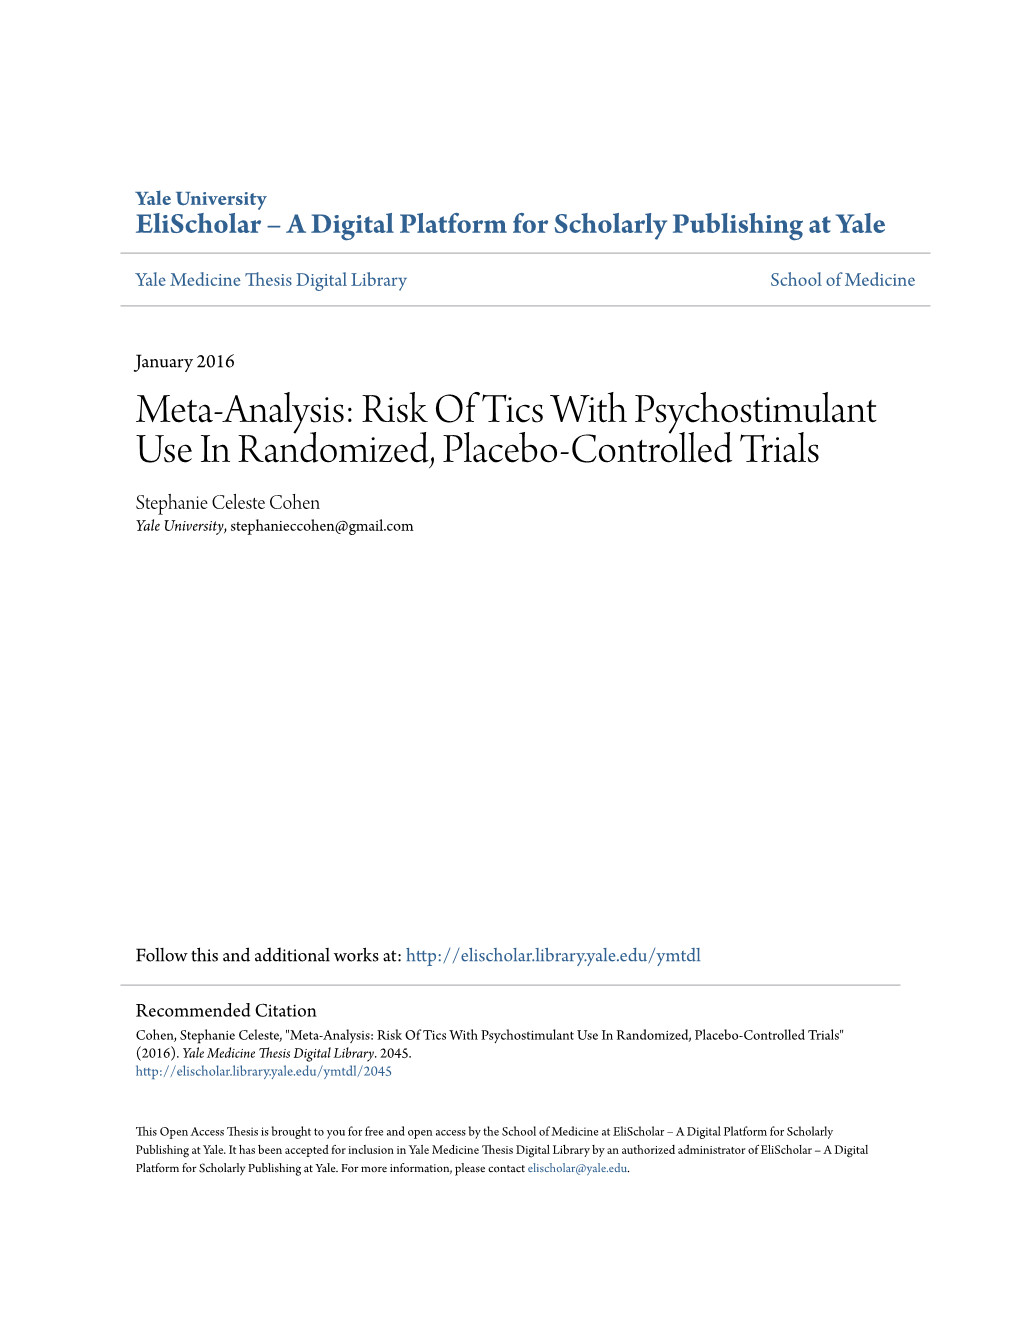 Risk of Tics with Psychostimulant Use in Randomized, Placebo-Controlled Trials Stephanie Celeste Cohen Yale University, Stephanieccohen@Gmail.Com